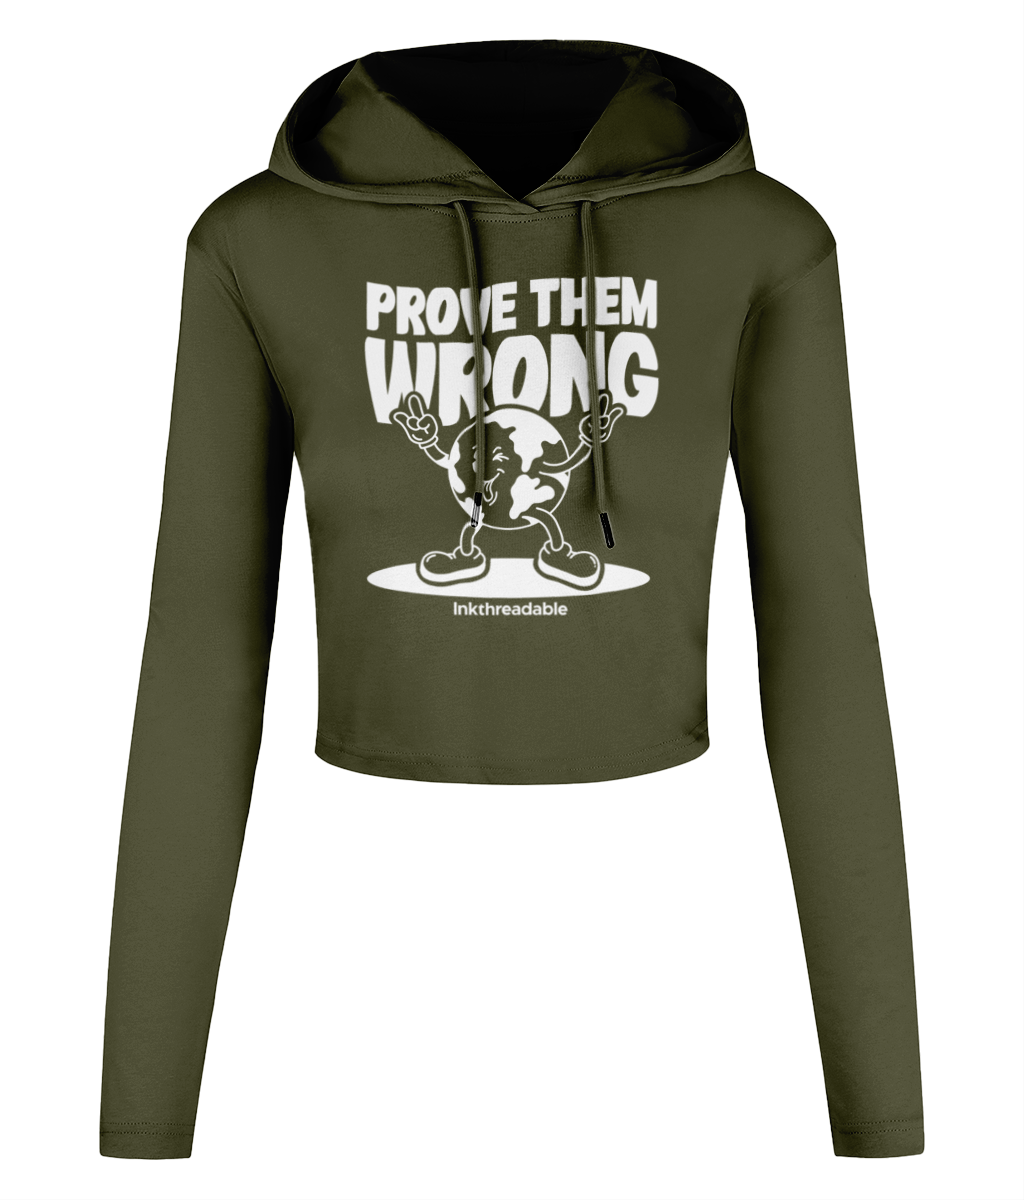 Women's Cropped Hooded T-shirt